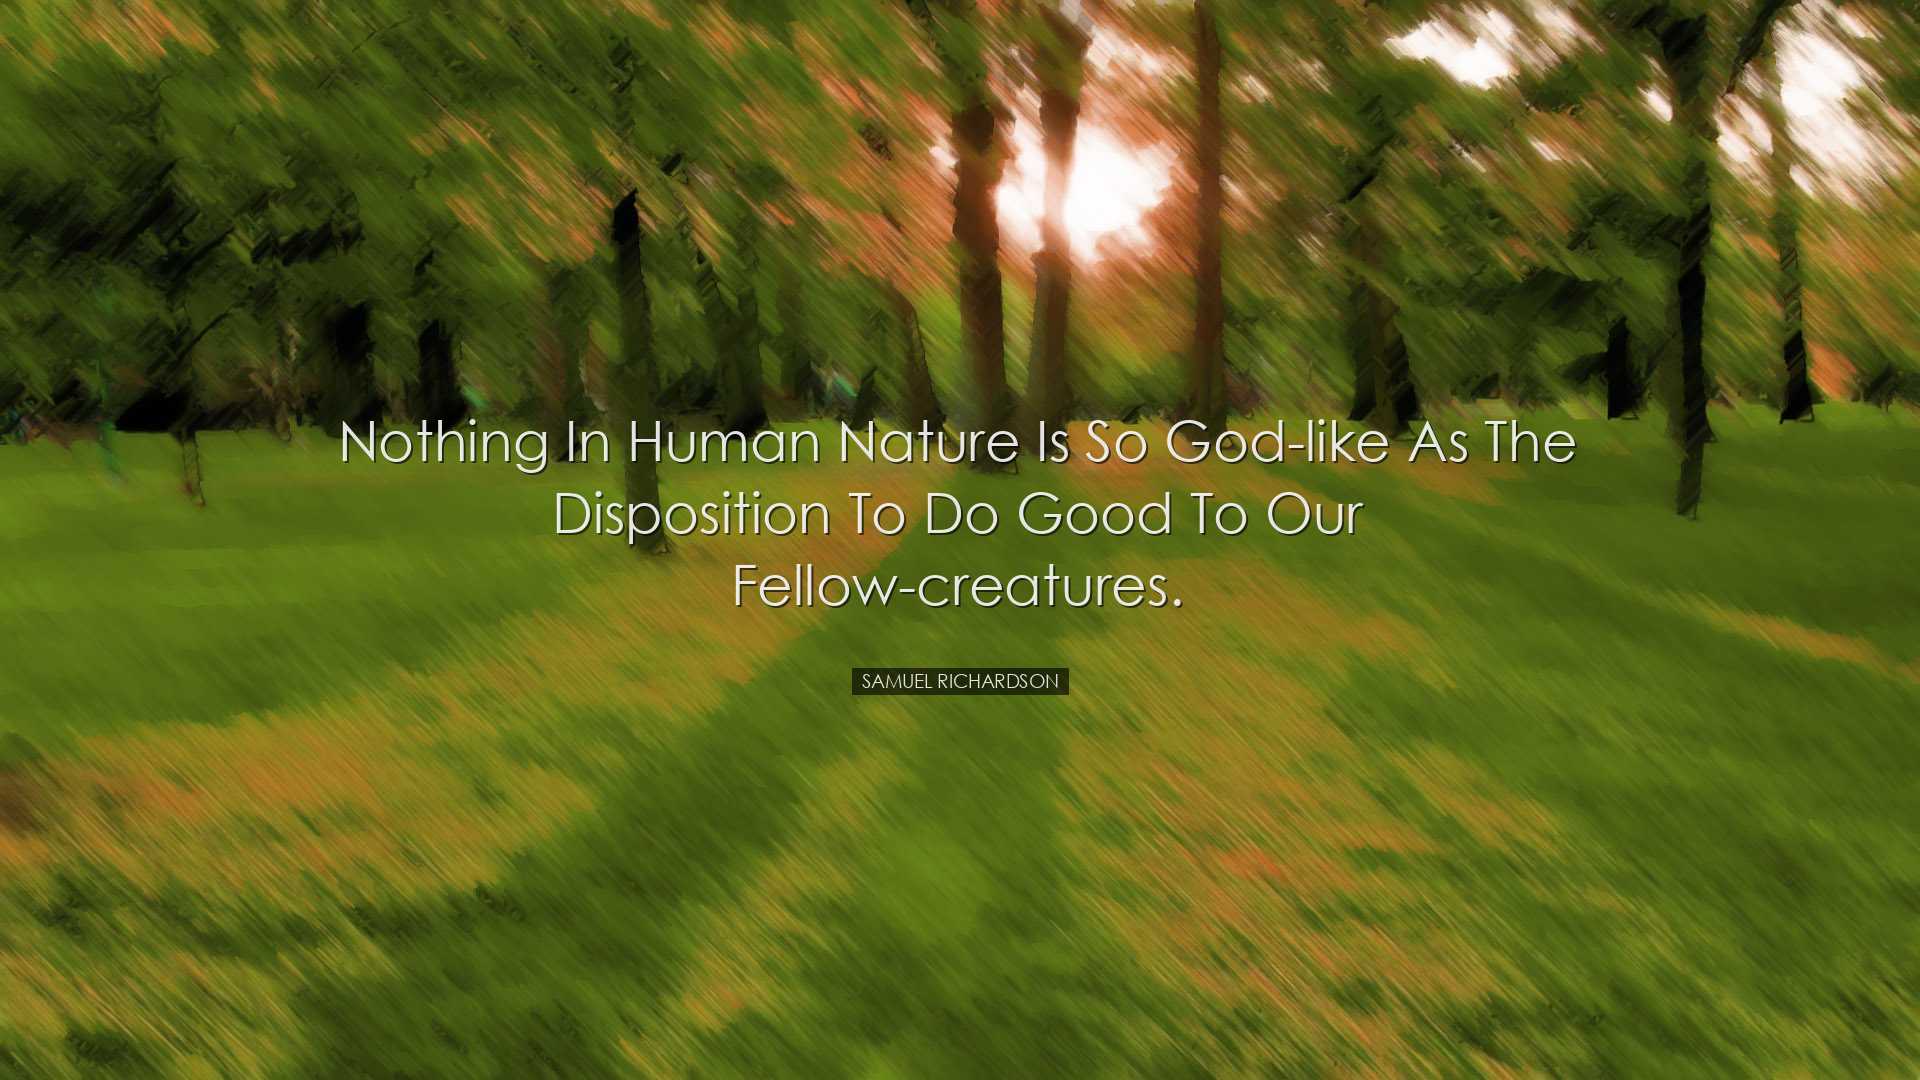 Nothing in human nature is so God-like as the disposition to do go